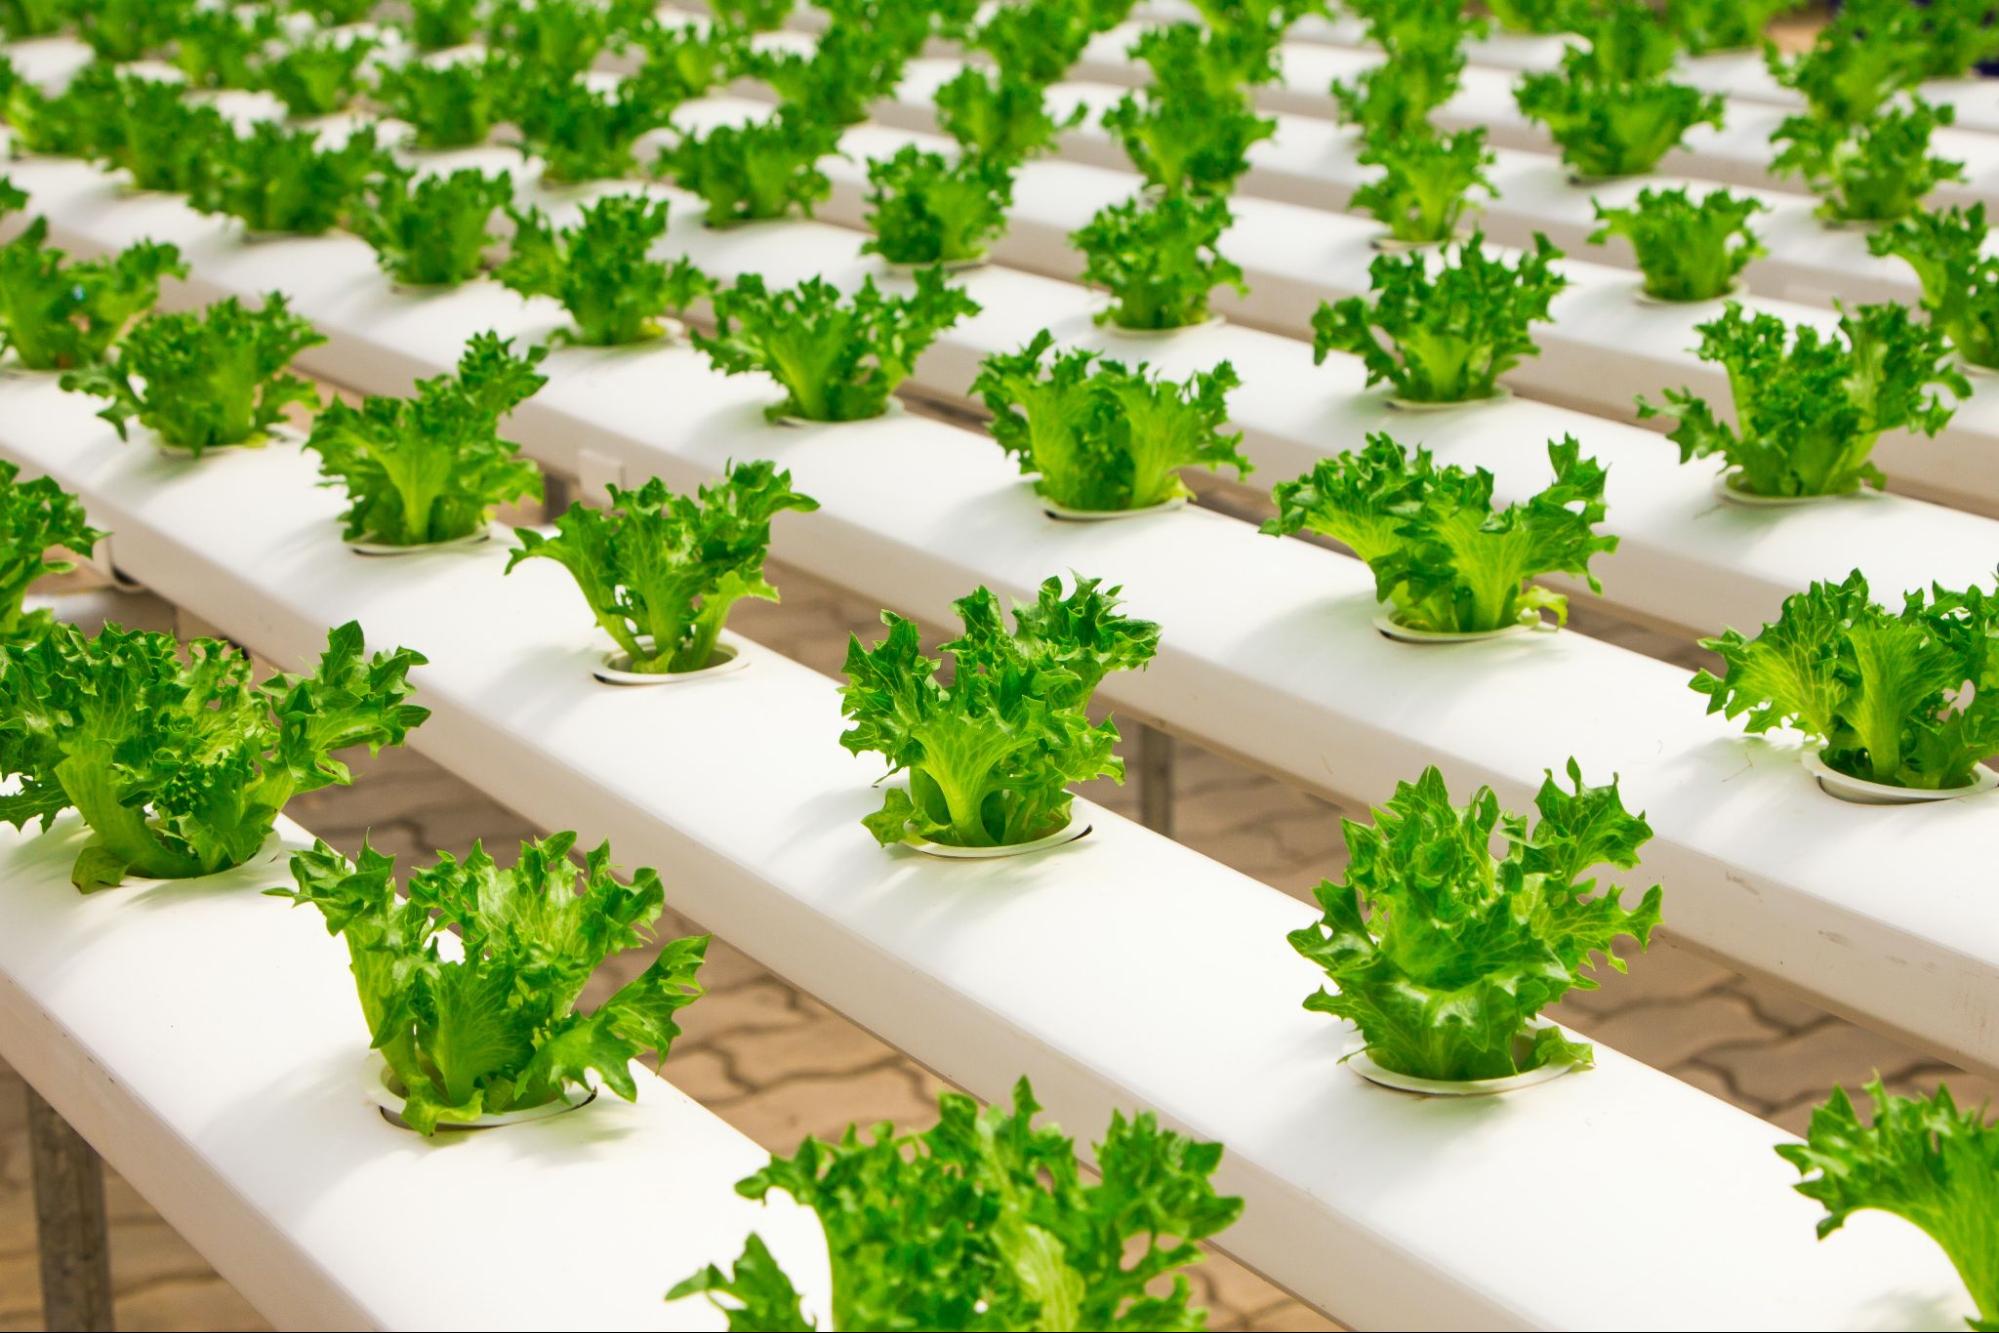 Rows of healthy green lettuce plants hydroponically grown indoors